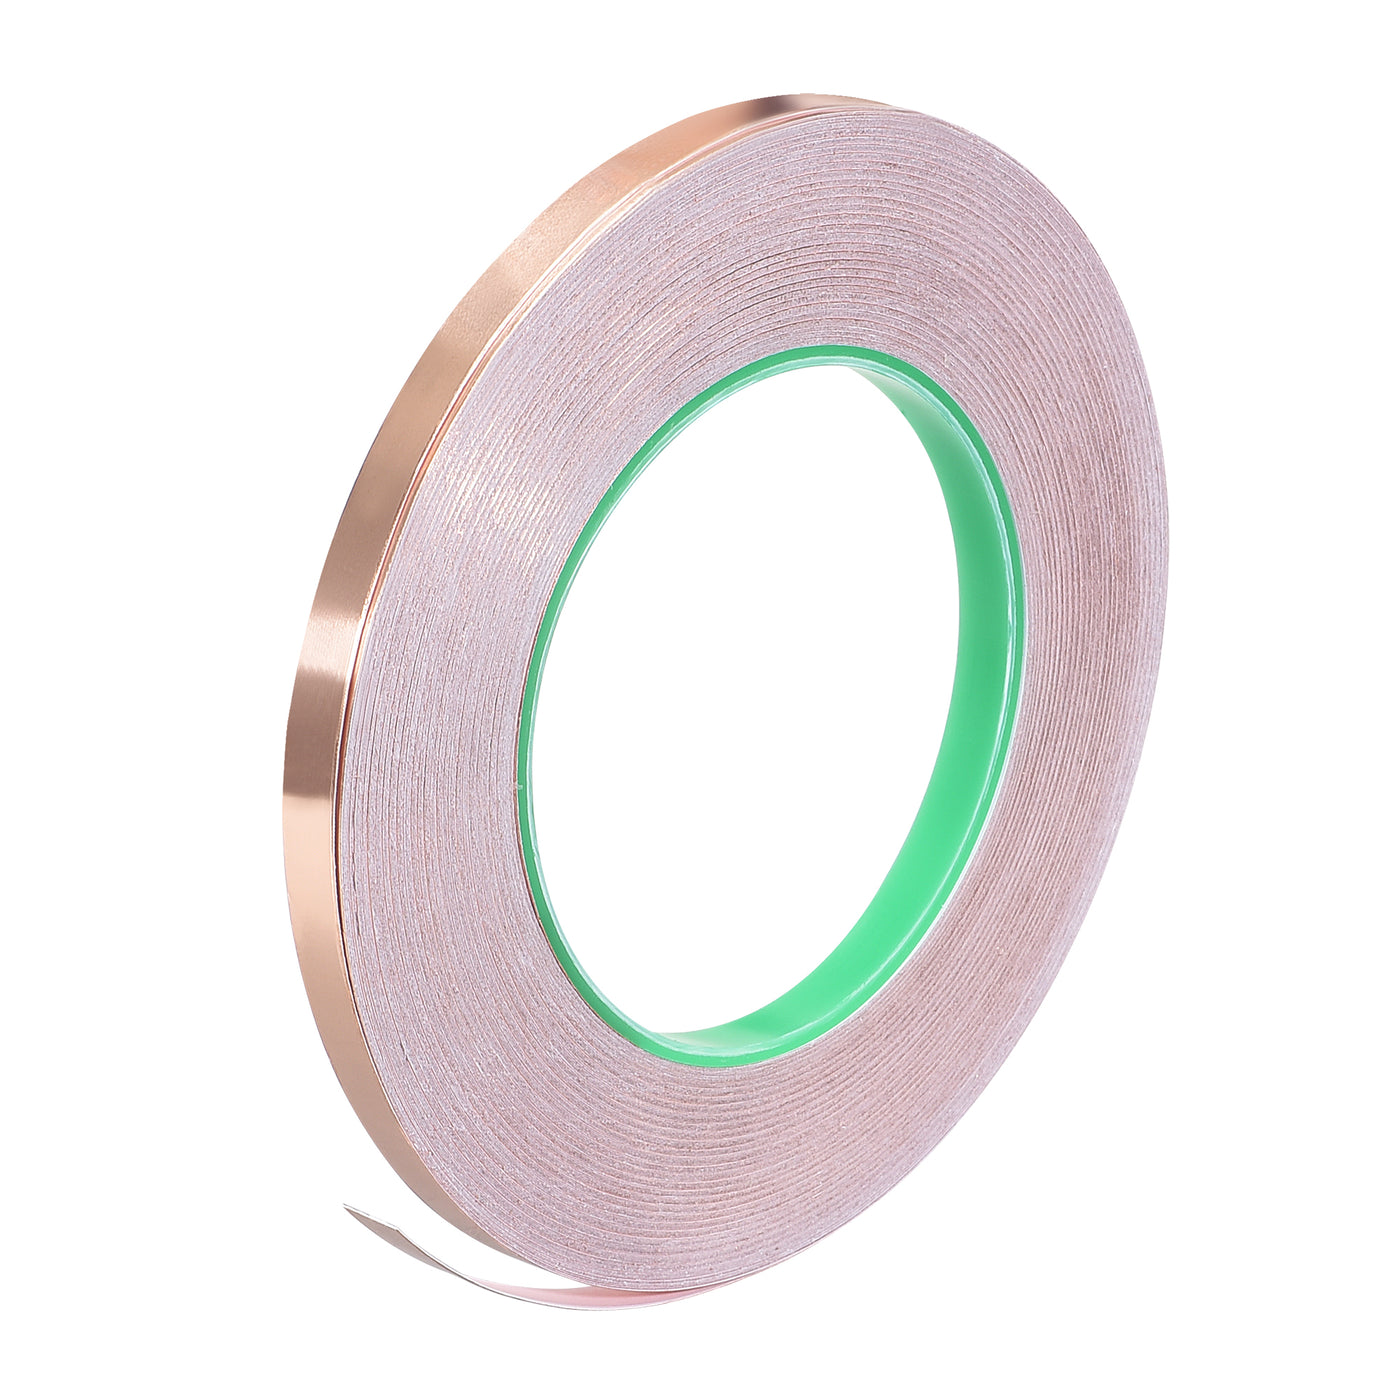 uxcell Uxcell Double-Sided Conductive Tape Copper Foil Tape 6mm x 50m/164ft for EMI Shielding 1pcs